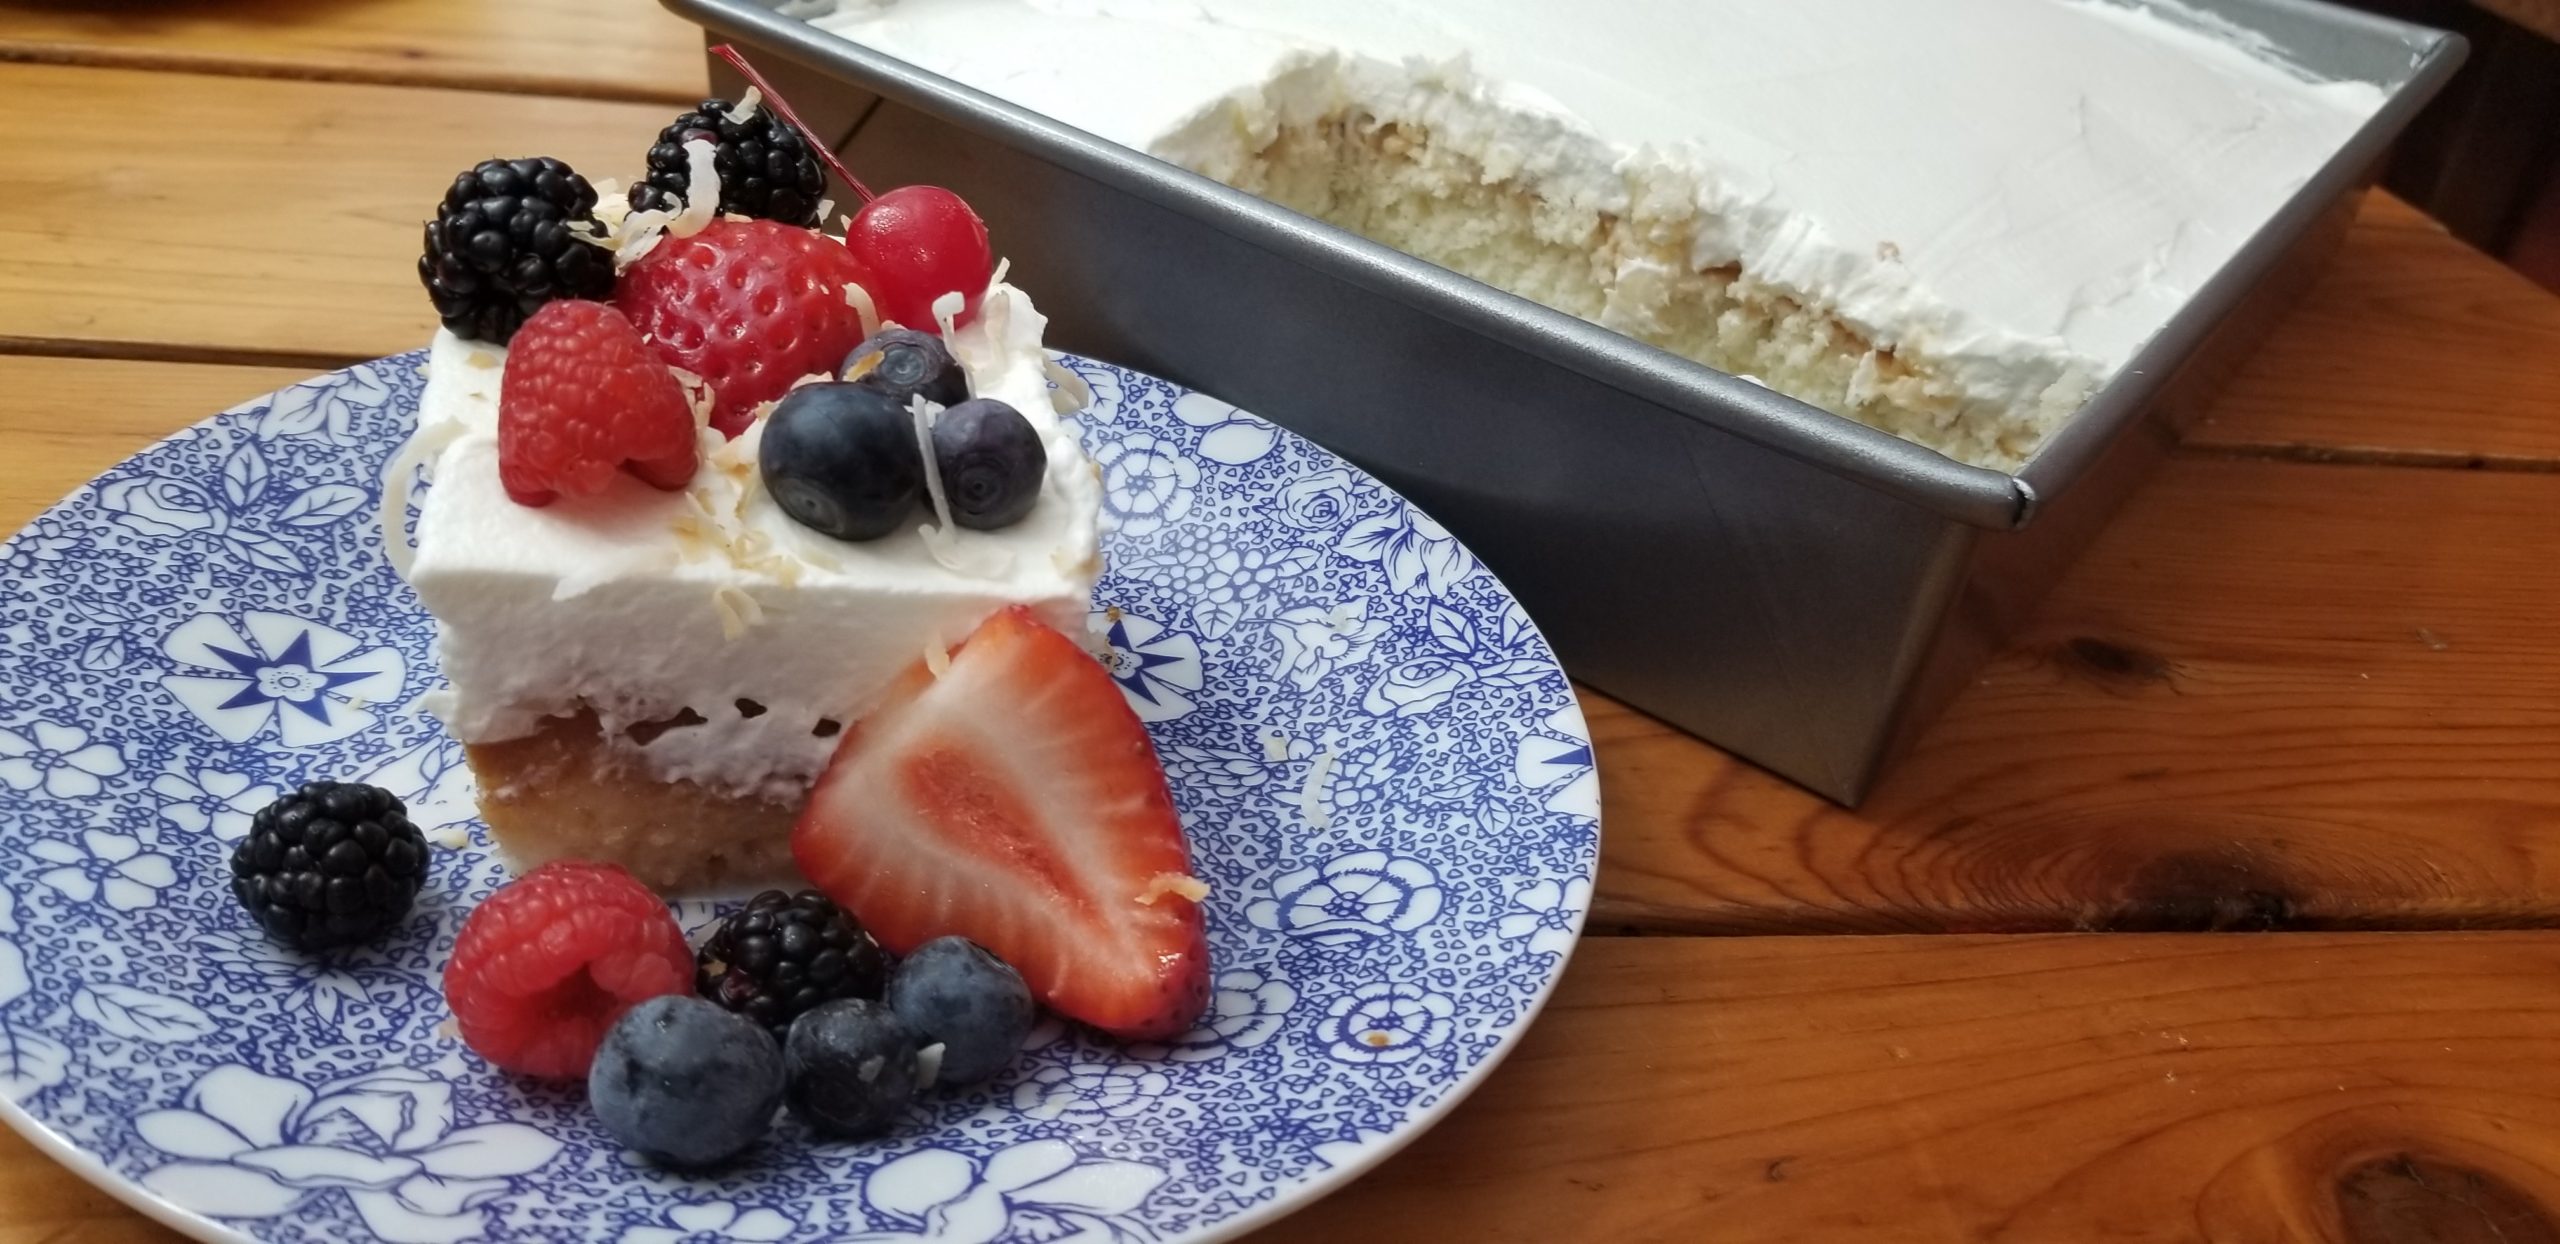 Coconut Pineapple Tres Leches Cake with Berries